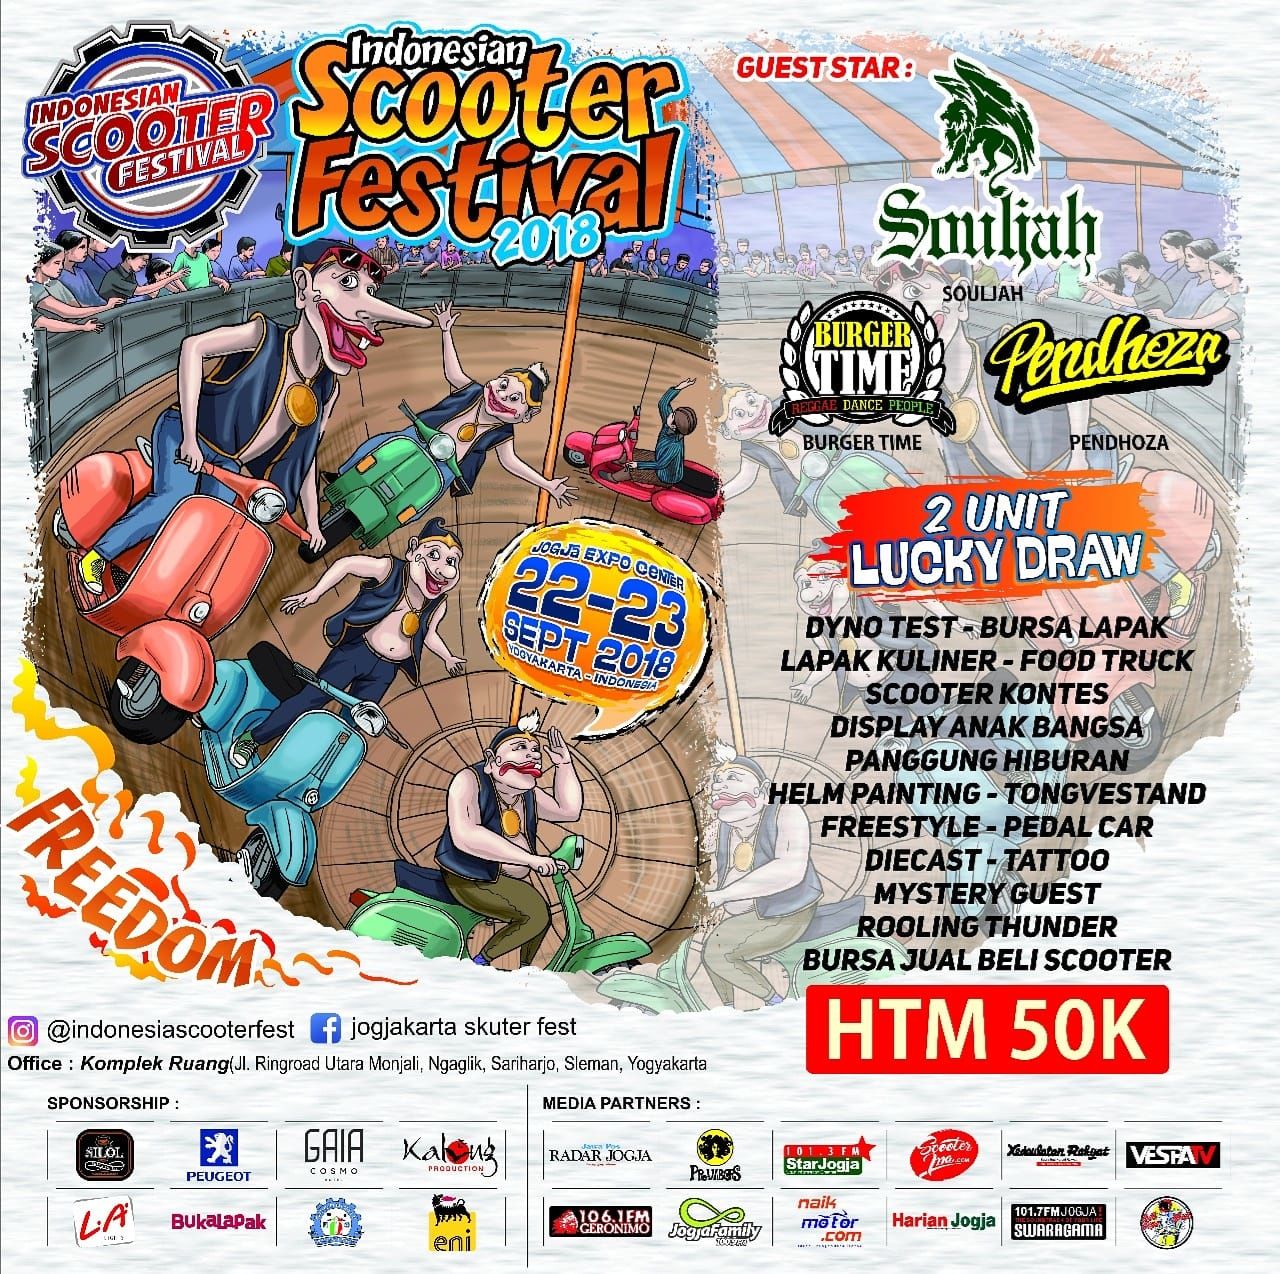 Indonesia Scooter Festival (ISF) 2018